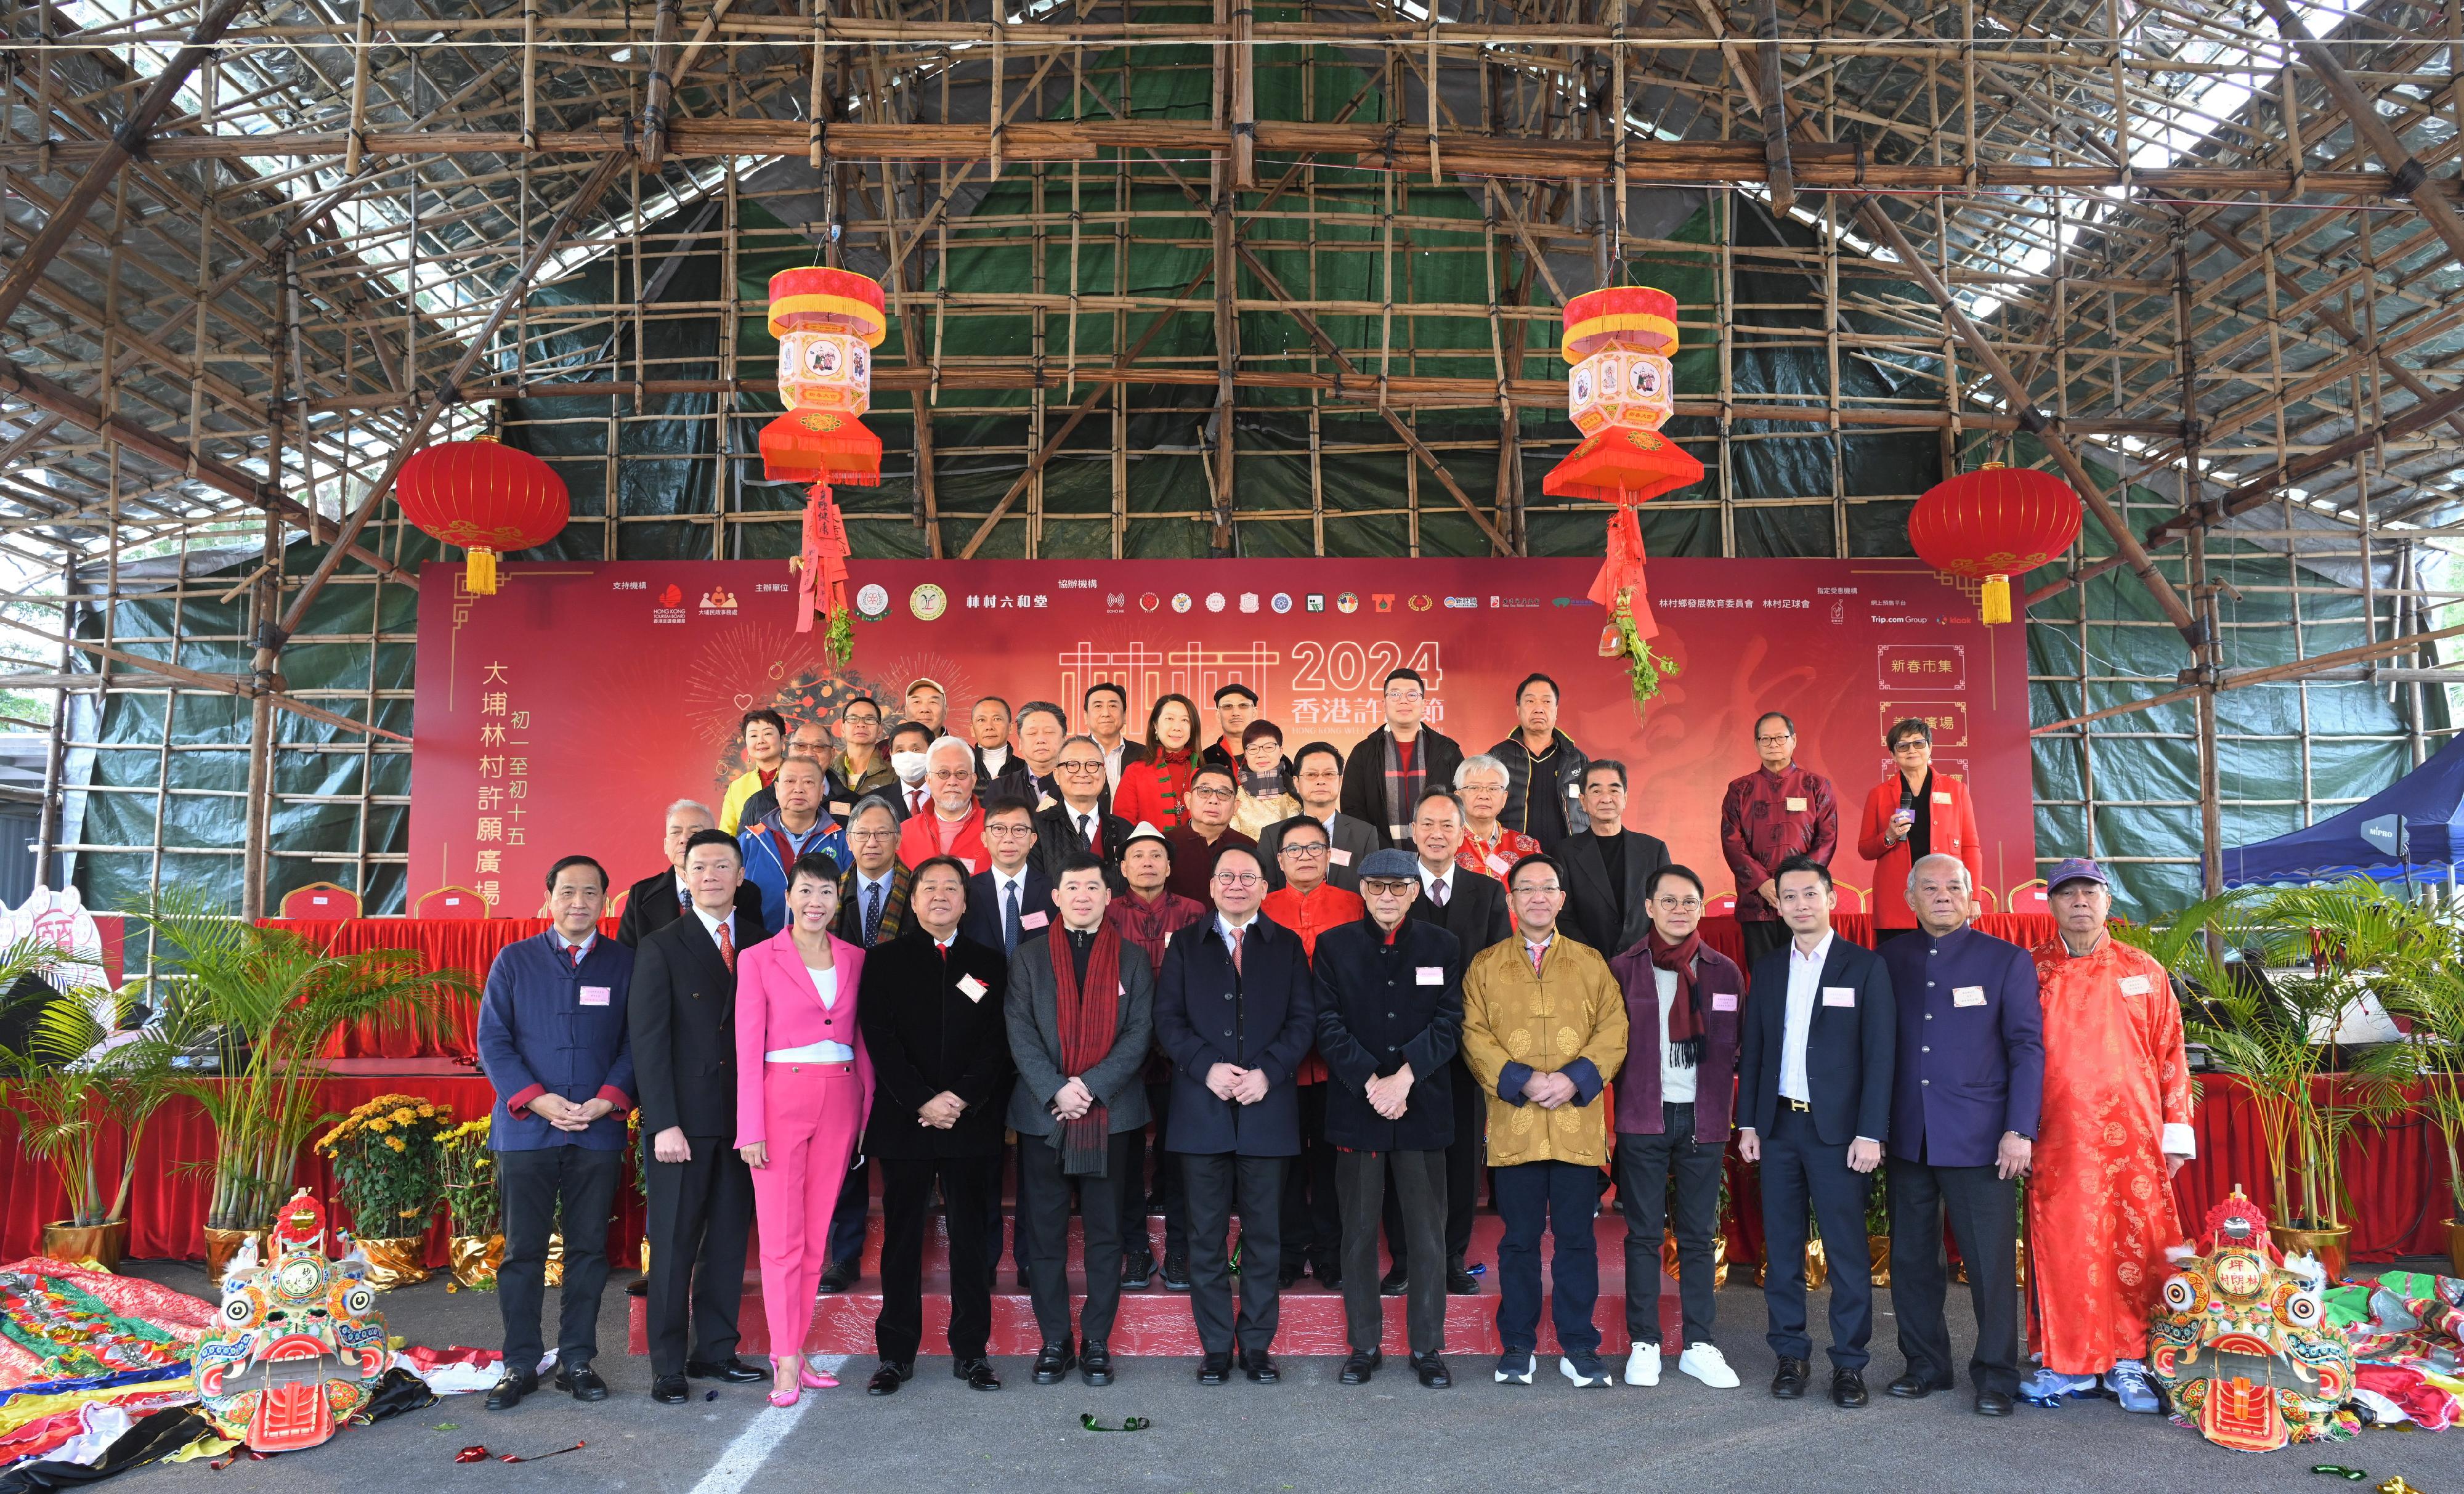 The Chief Secretary for Administration, Mr Chan Kwok-ki, attends the Hong Kong Well-wishing Festival 2024 at Lam Tsuen, Tai Po, today (February 10), on the first day of the Lunar New Year. Photo shows Mr Chan (first row, sixth left); the initiator of the Hong Kong Well-wishing Festival, Mr Cheung Hok-ming (first row, sixth right); the Chairman of the Heung Yee Kuk New Territories, Mr Kenneth Lau (first row, fifth right), and other guests at the event.